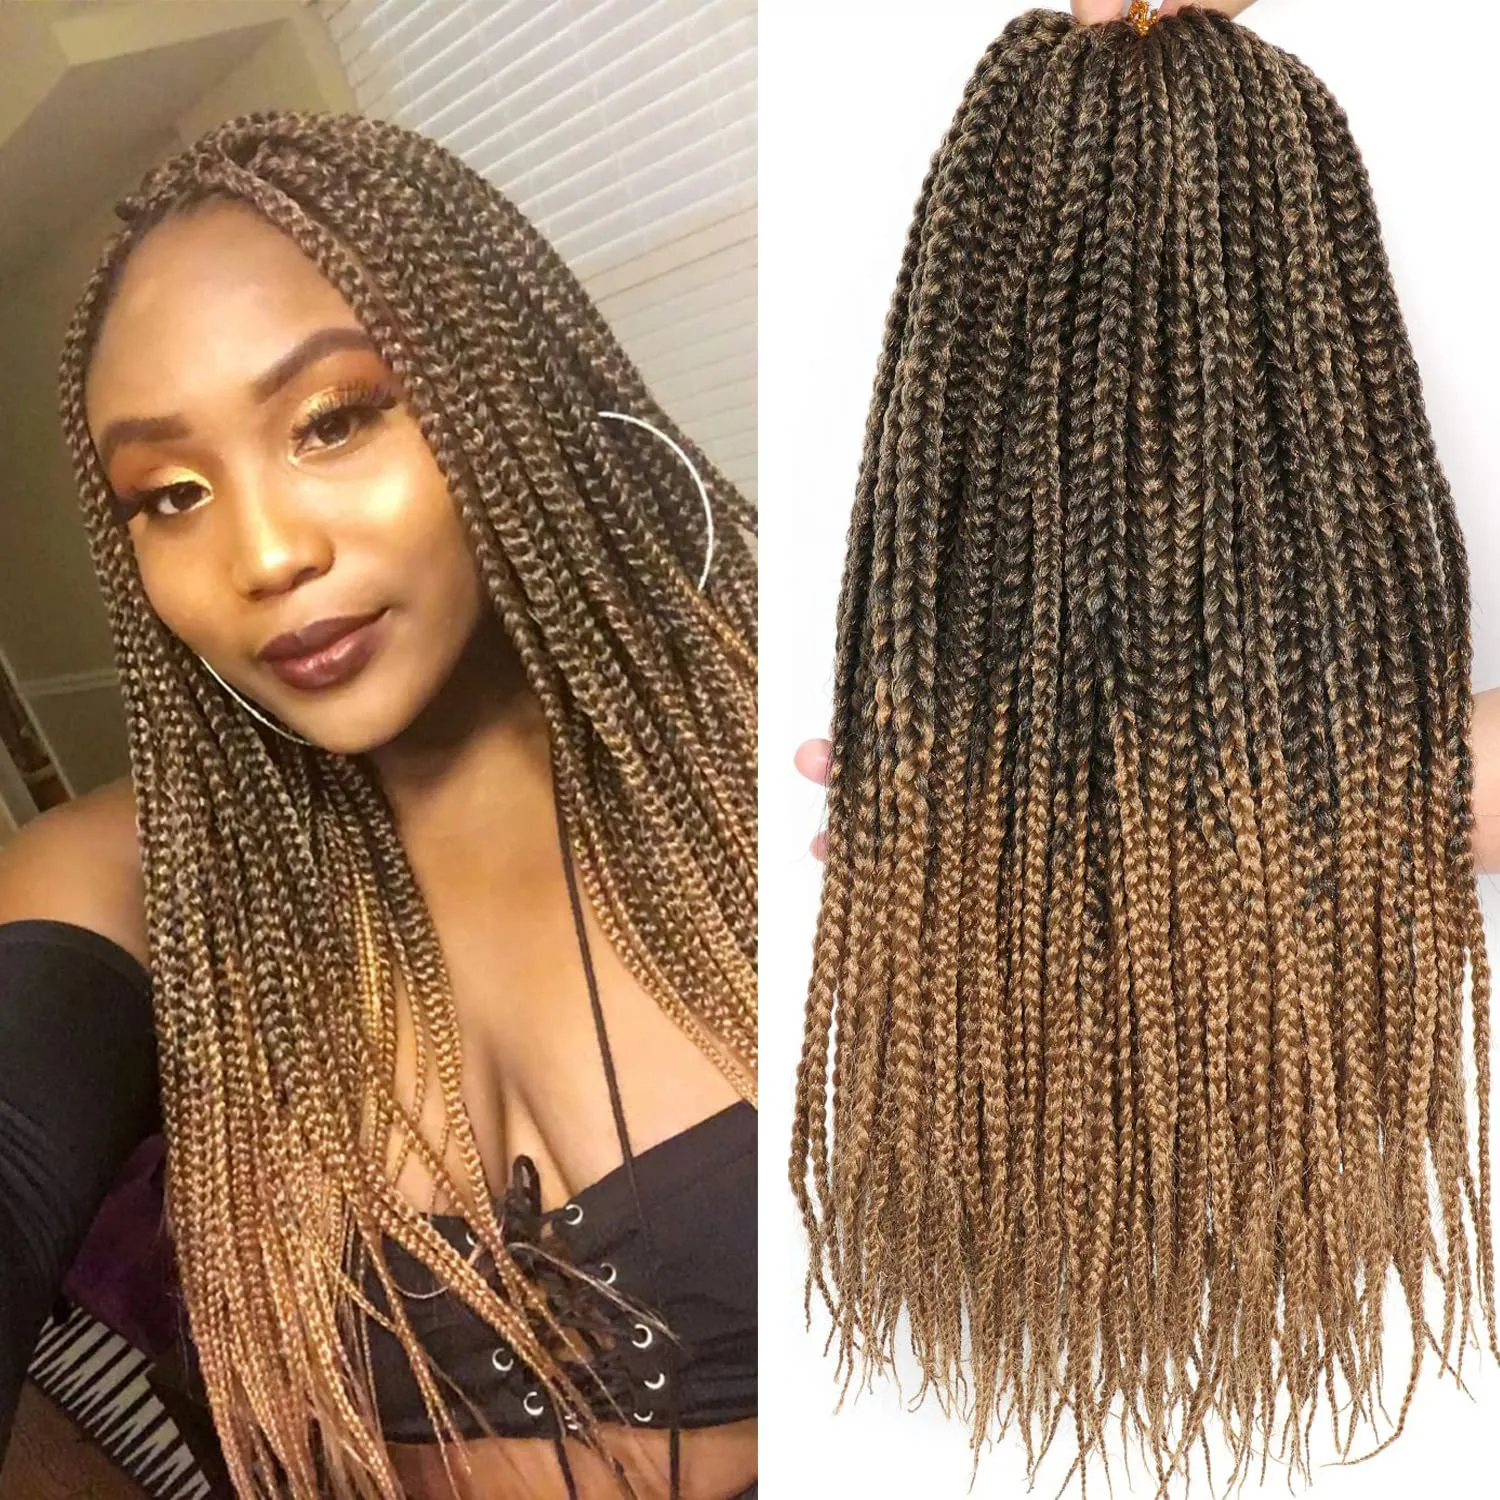 24 Synthetic Box Braid Hair Extensions For Women Heat Resistant Straight  Braids With Colored Box Braided Line Knot Afro Braid Fiber From Eco_hair,  $7.58